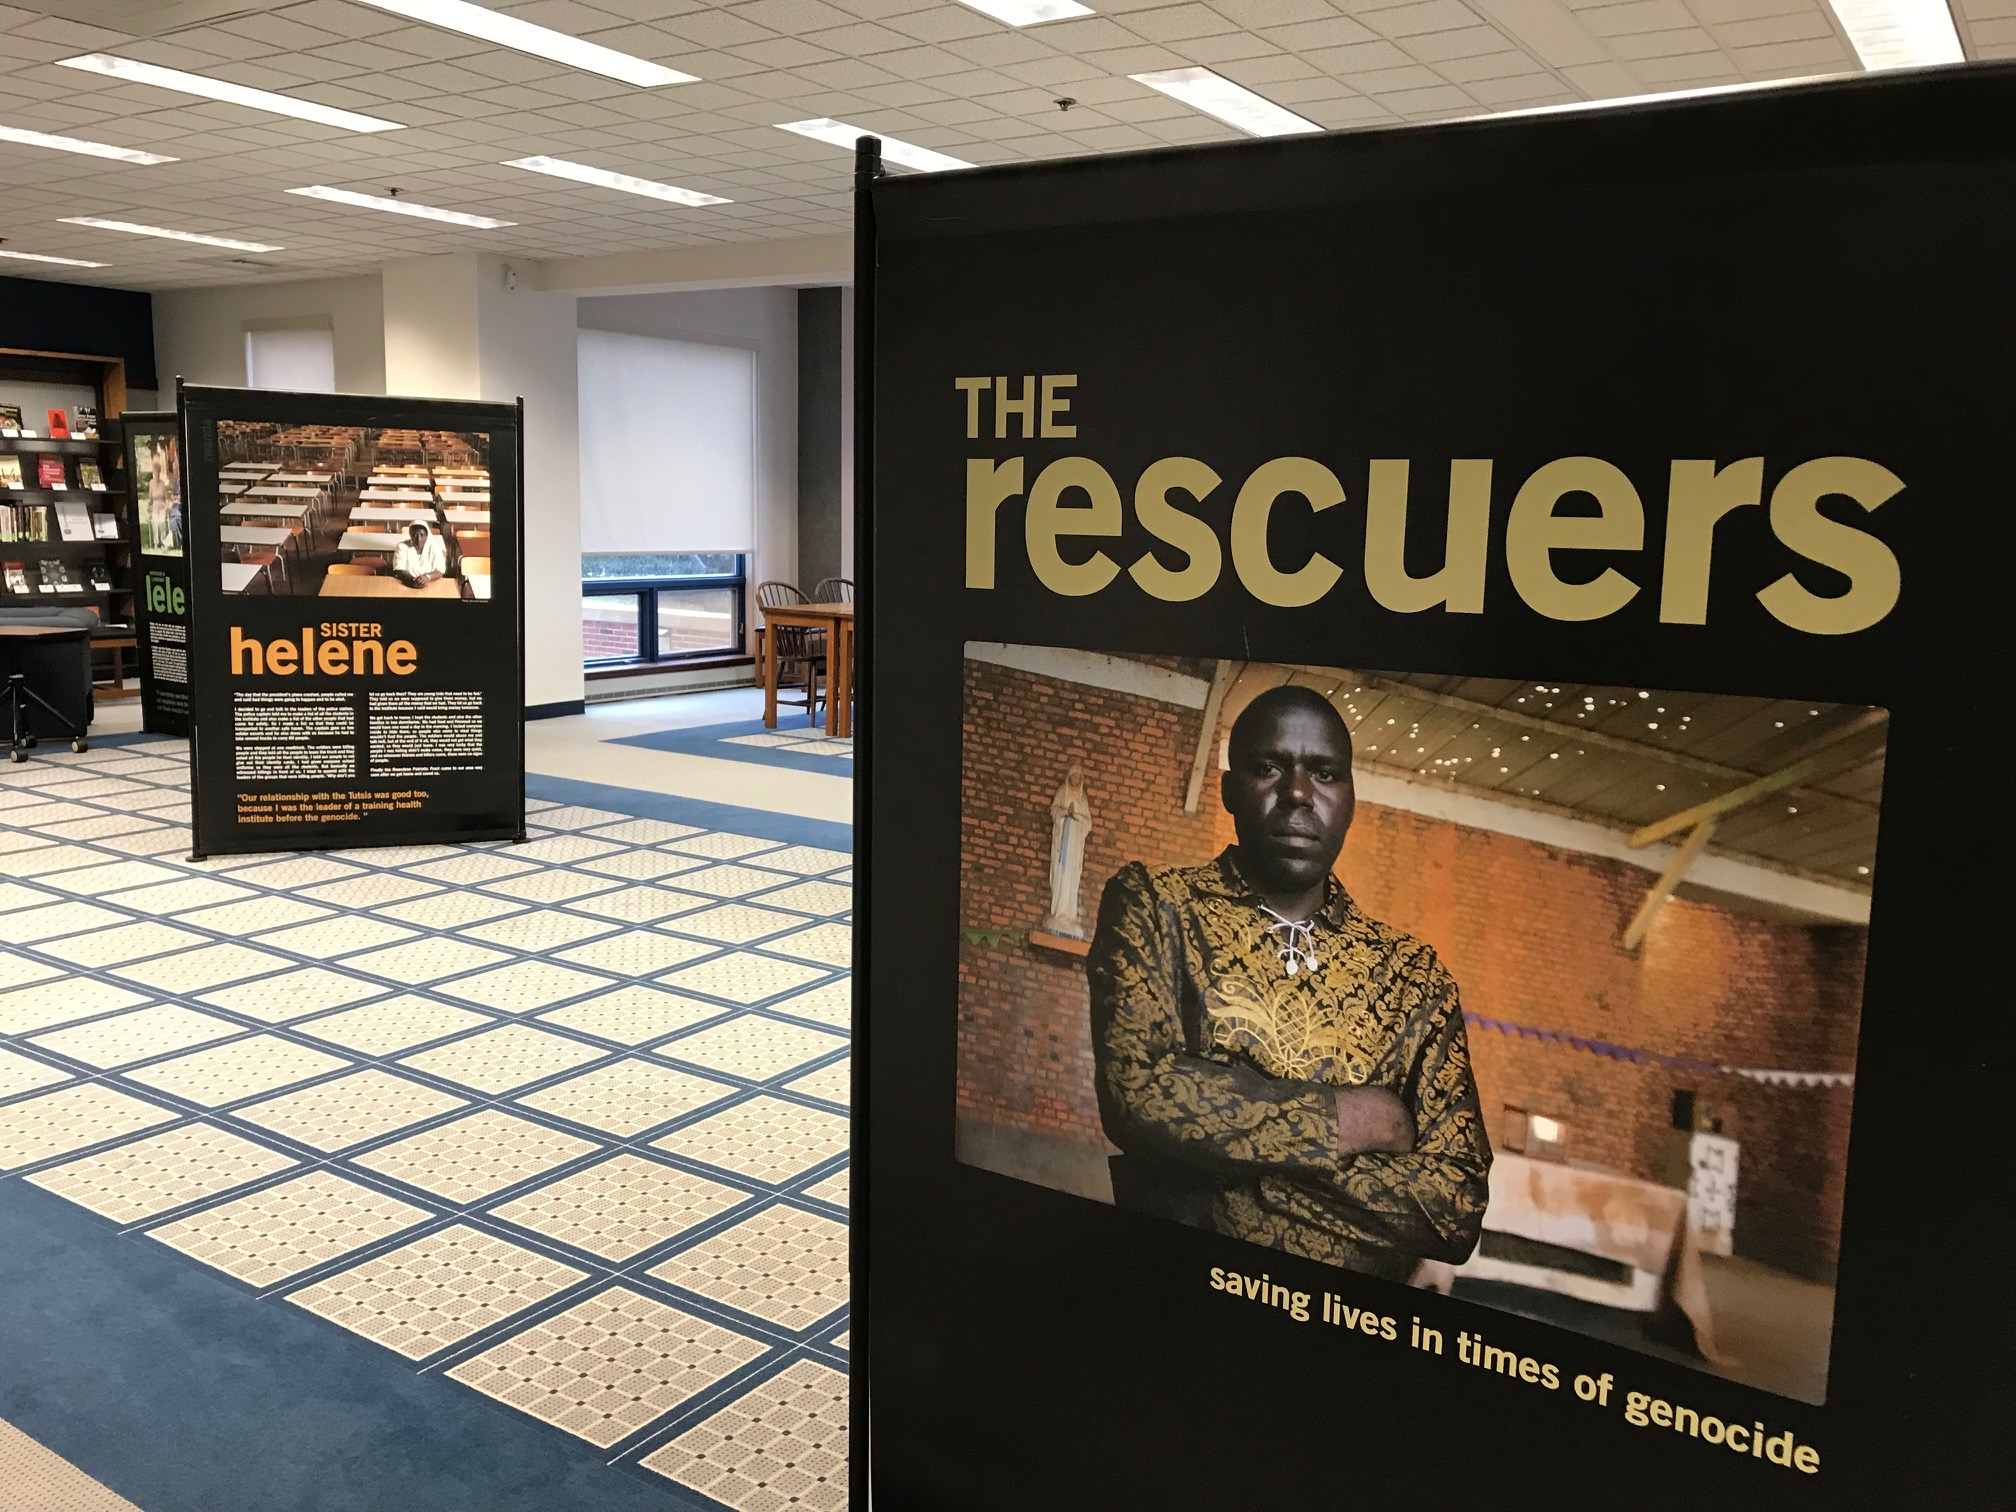 Elizabethtown College High Library Houses “Rescuers”